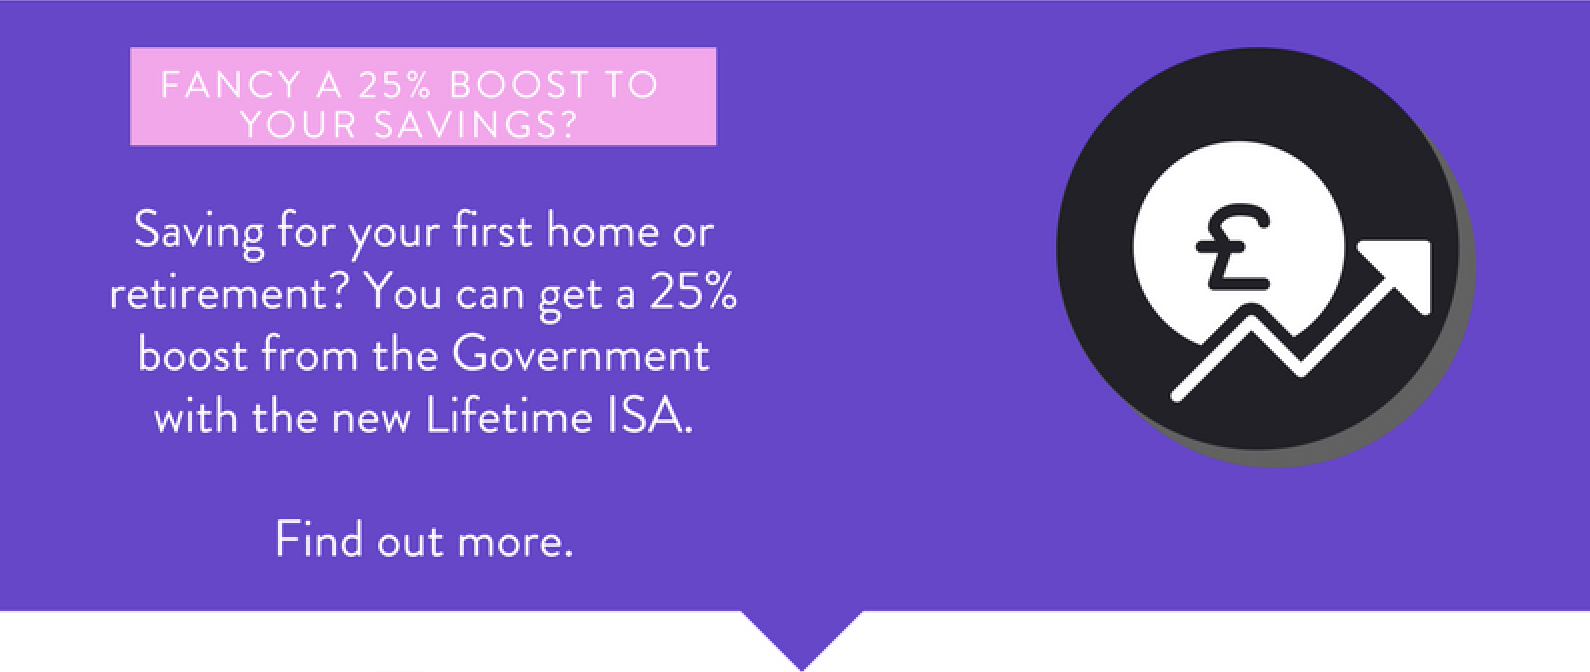 The new Lifetime ISA starts in the new tax year